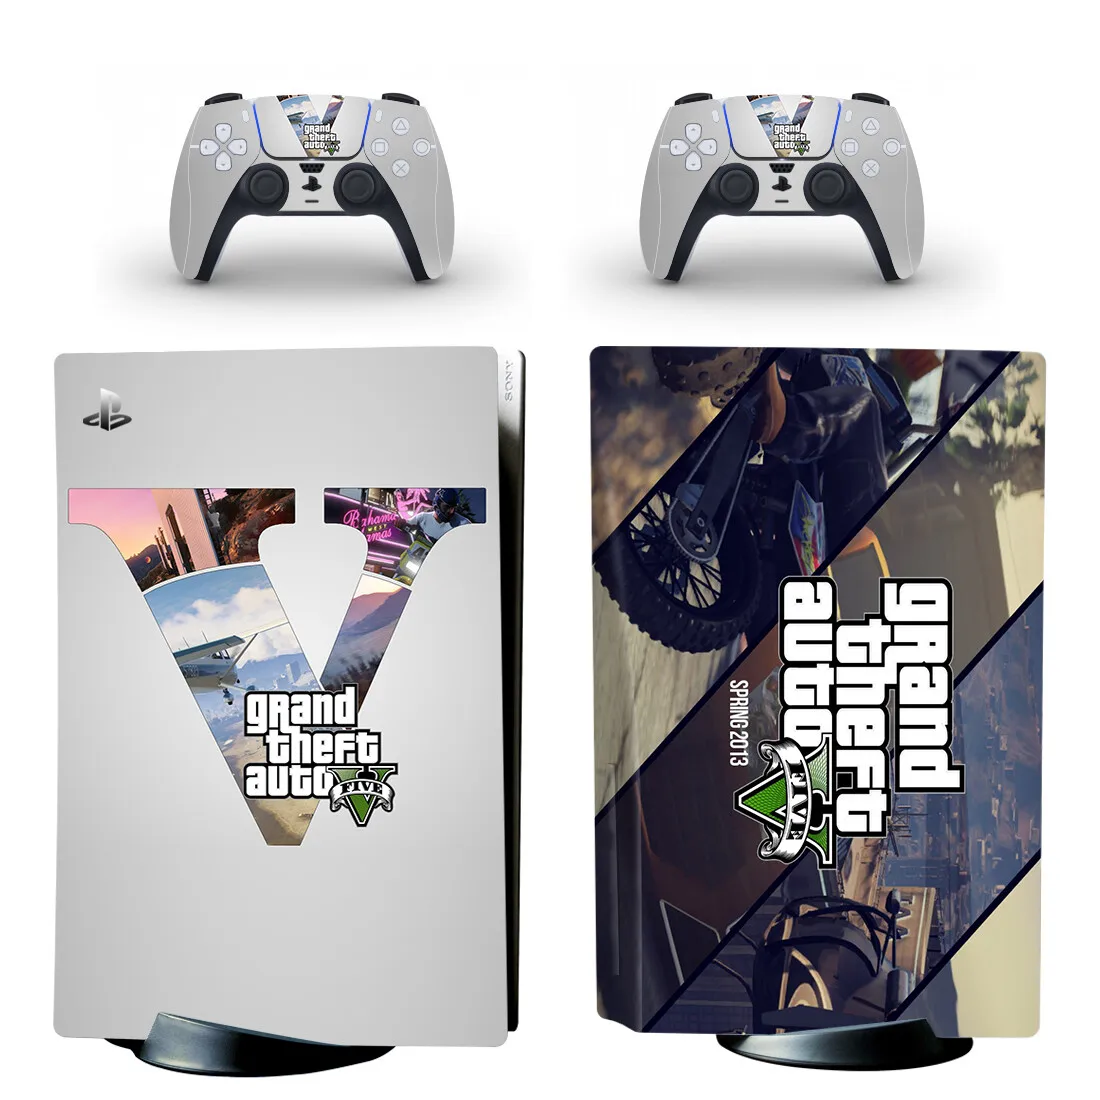 

Grand Theft Auto V GTA 5 PS5 Disc Sticker Decal Cover for PlayStation 5 Console and 2 Controllers PS5 Disk Skin Vinyl